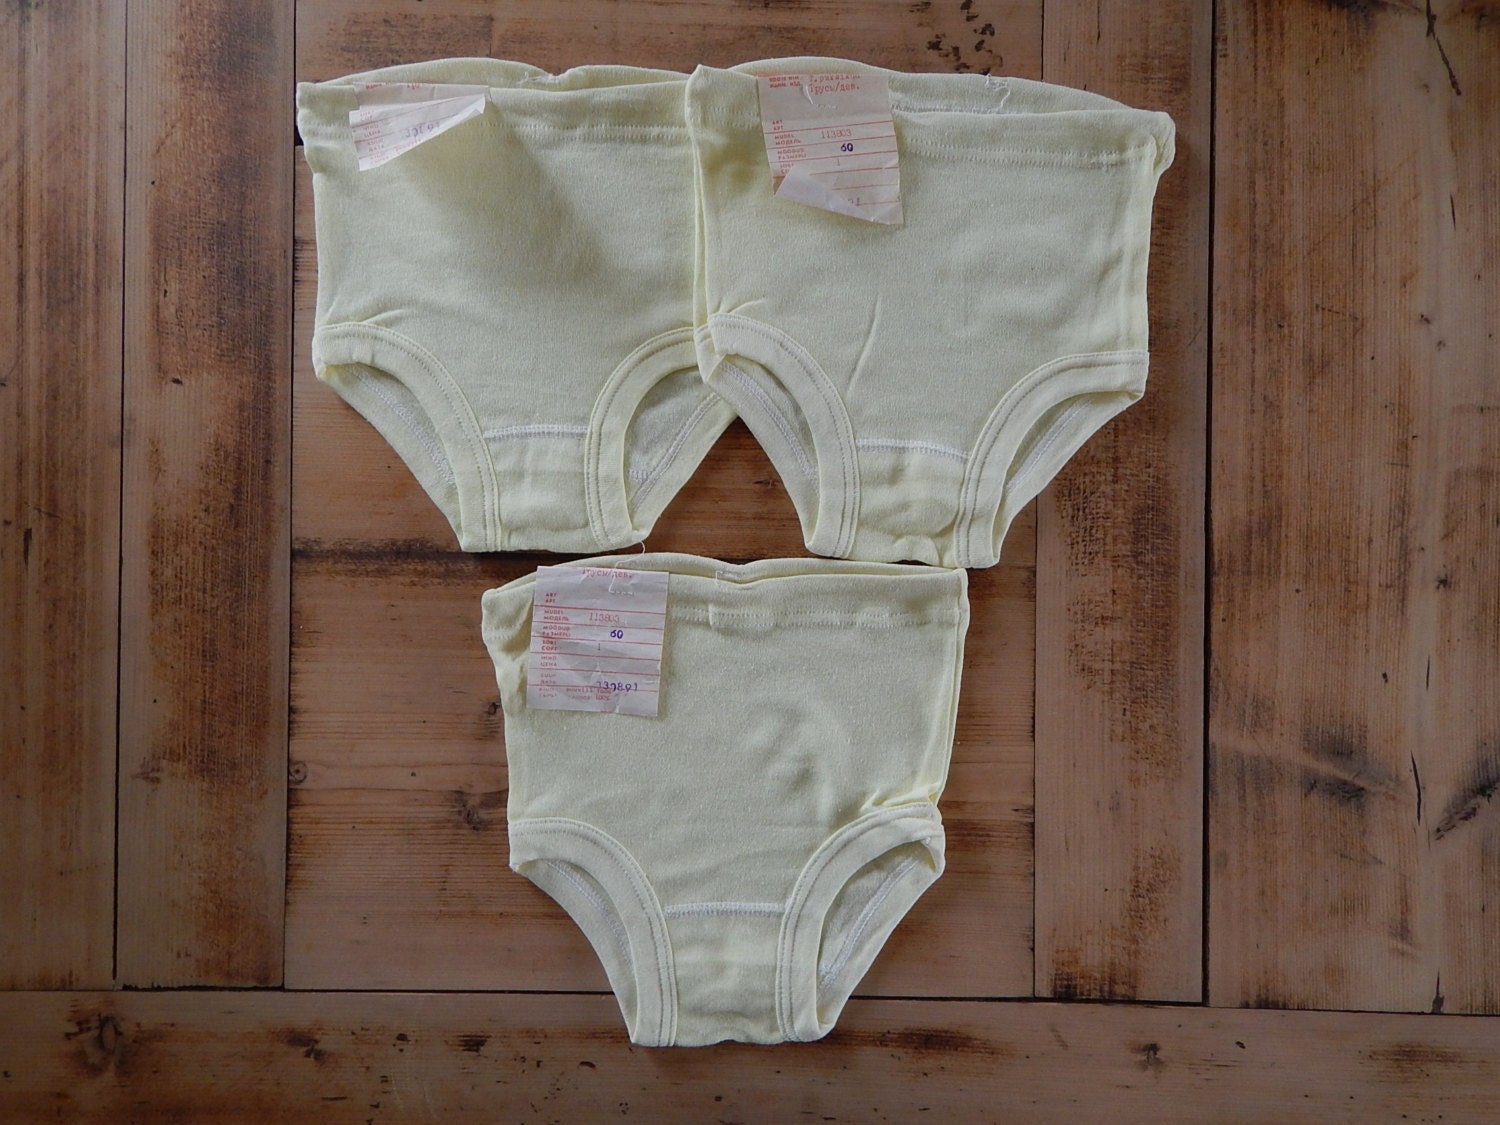 Soviet Vintage Underwear Kids Cotton Underpants Unused With Factory Tag  Light Yellow Underpants 100% Cotton Made in USSR Era 1980-s 